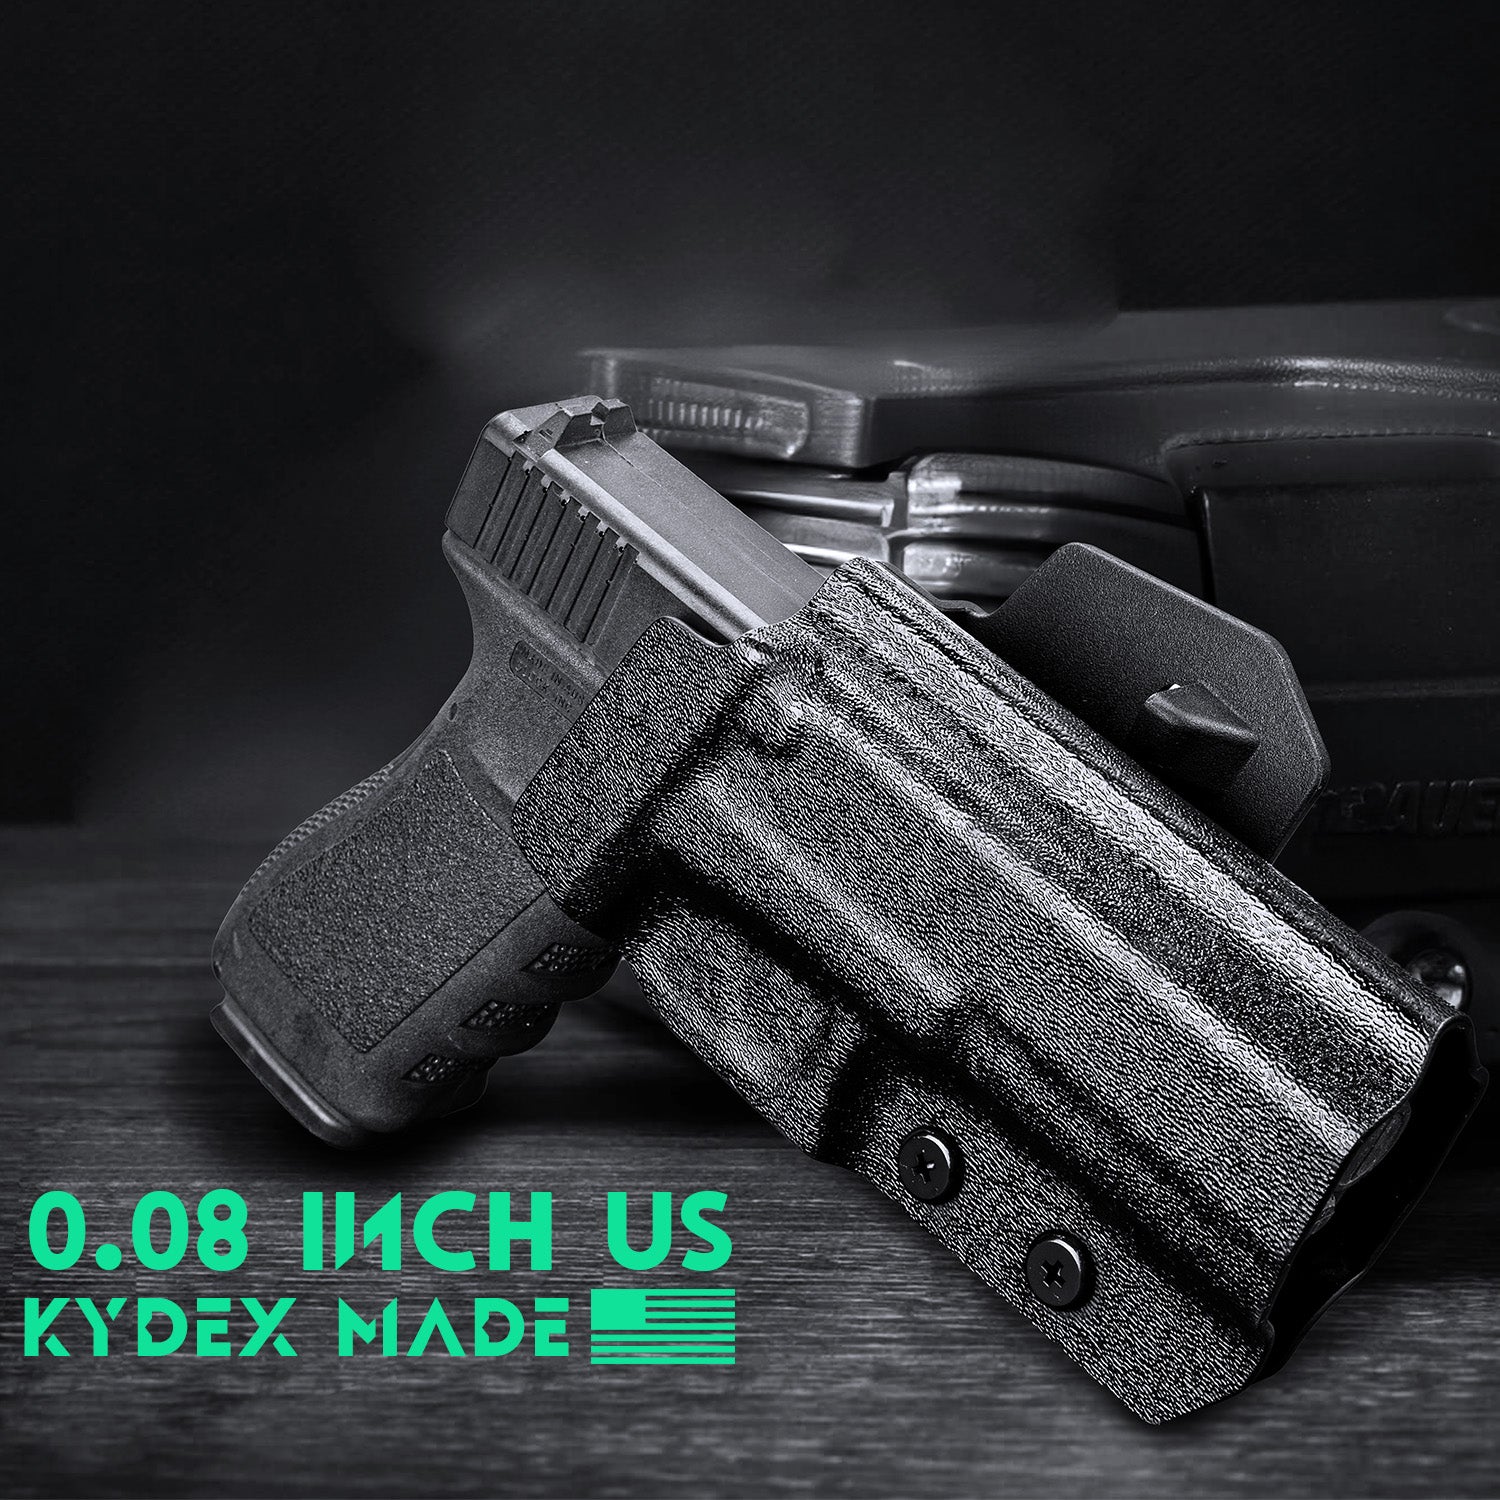 Glock 20 21 22 Holster OWB Kydex Holster Optics Cut: Glock 21 / Glock 20 (Gen 3 4 5) & Glock 22 Gen 5, Outside Waistband Open Carry G21 Holster with 1.75 Inch Paddle, Adj. Retention & Cant, Right|WARRIORLAND